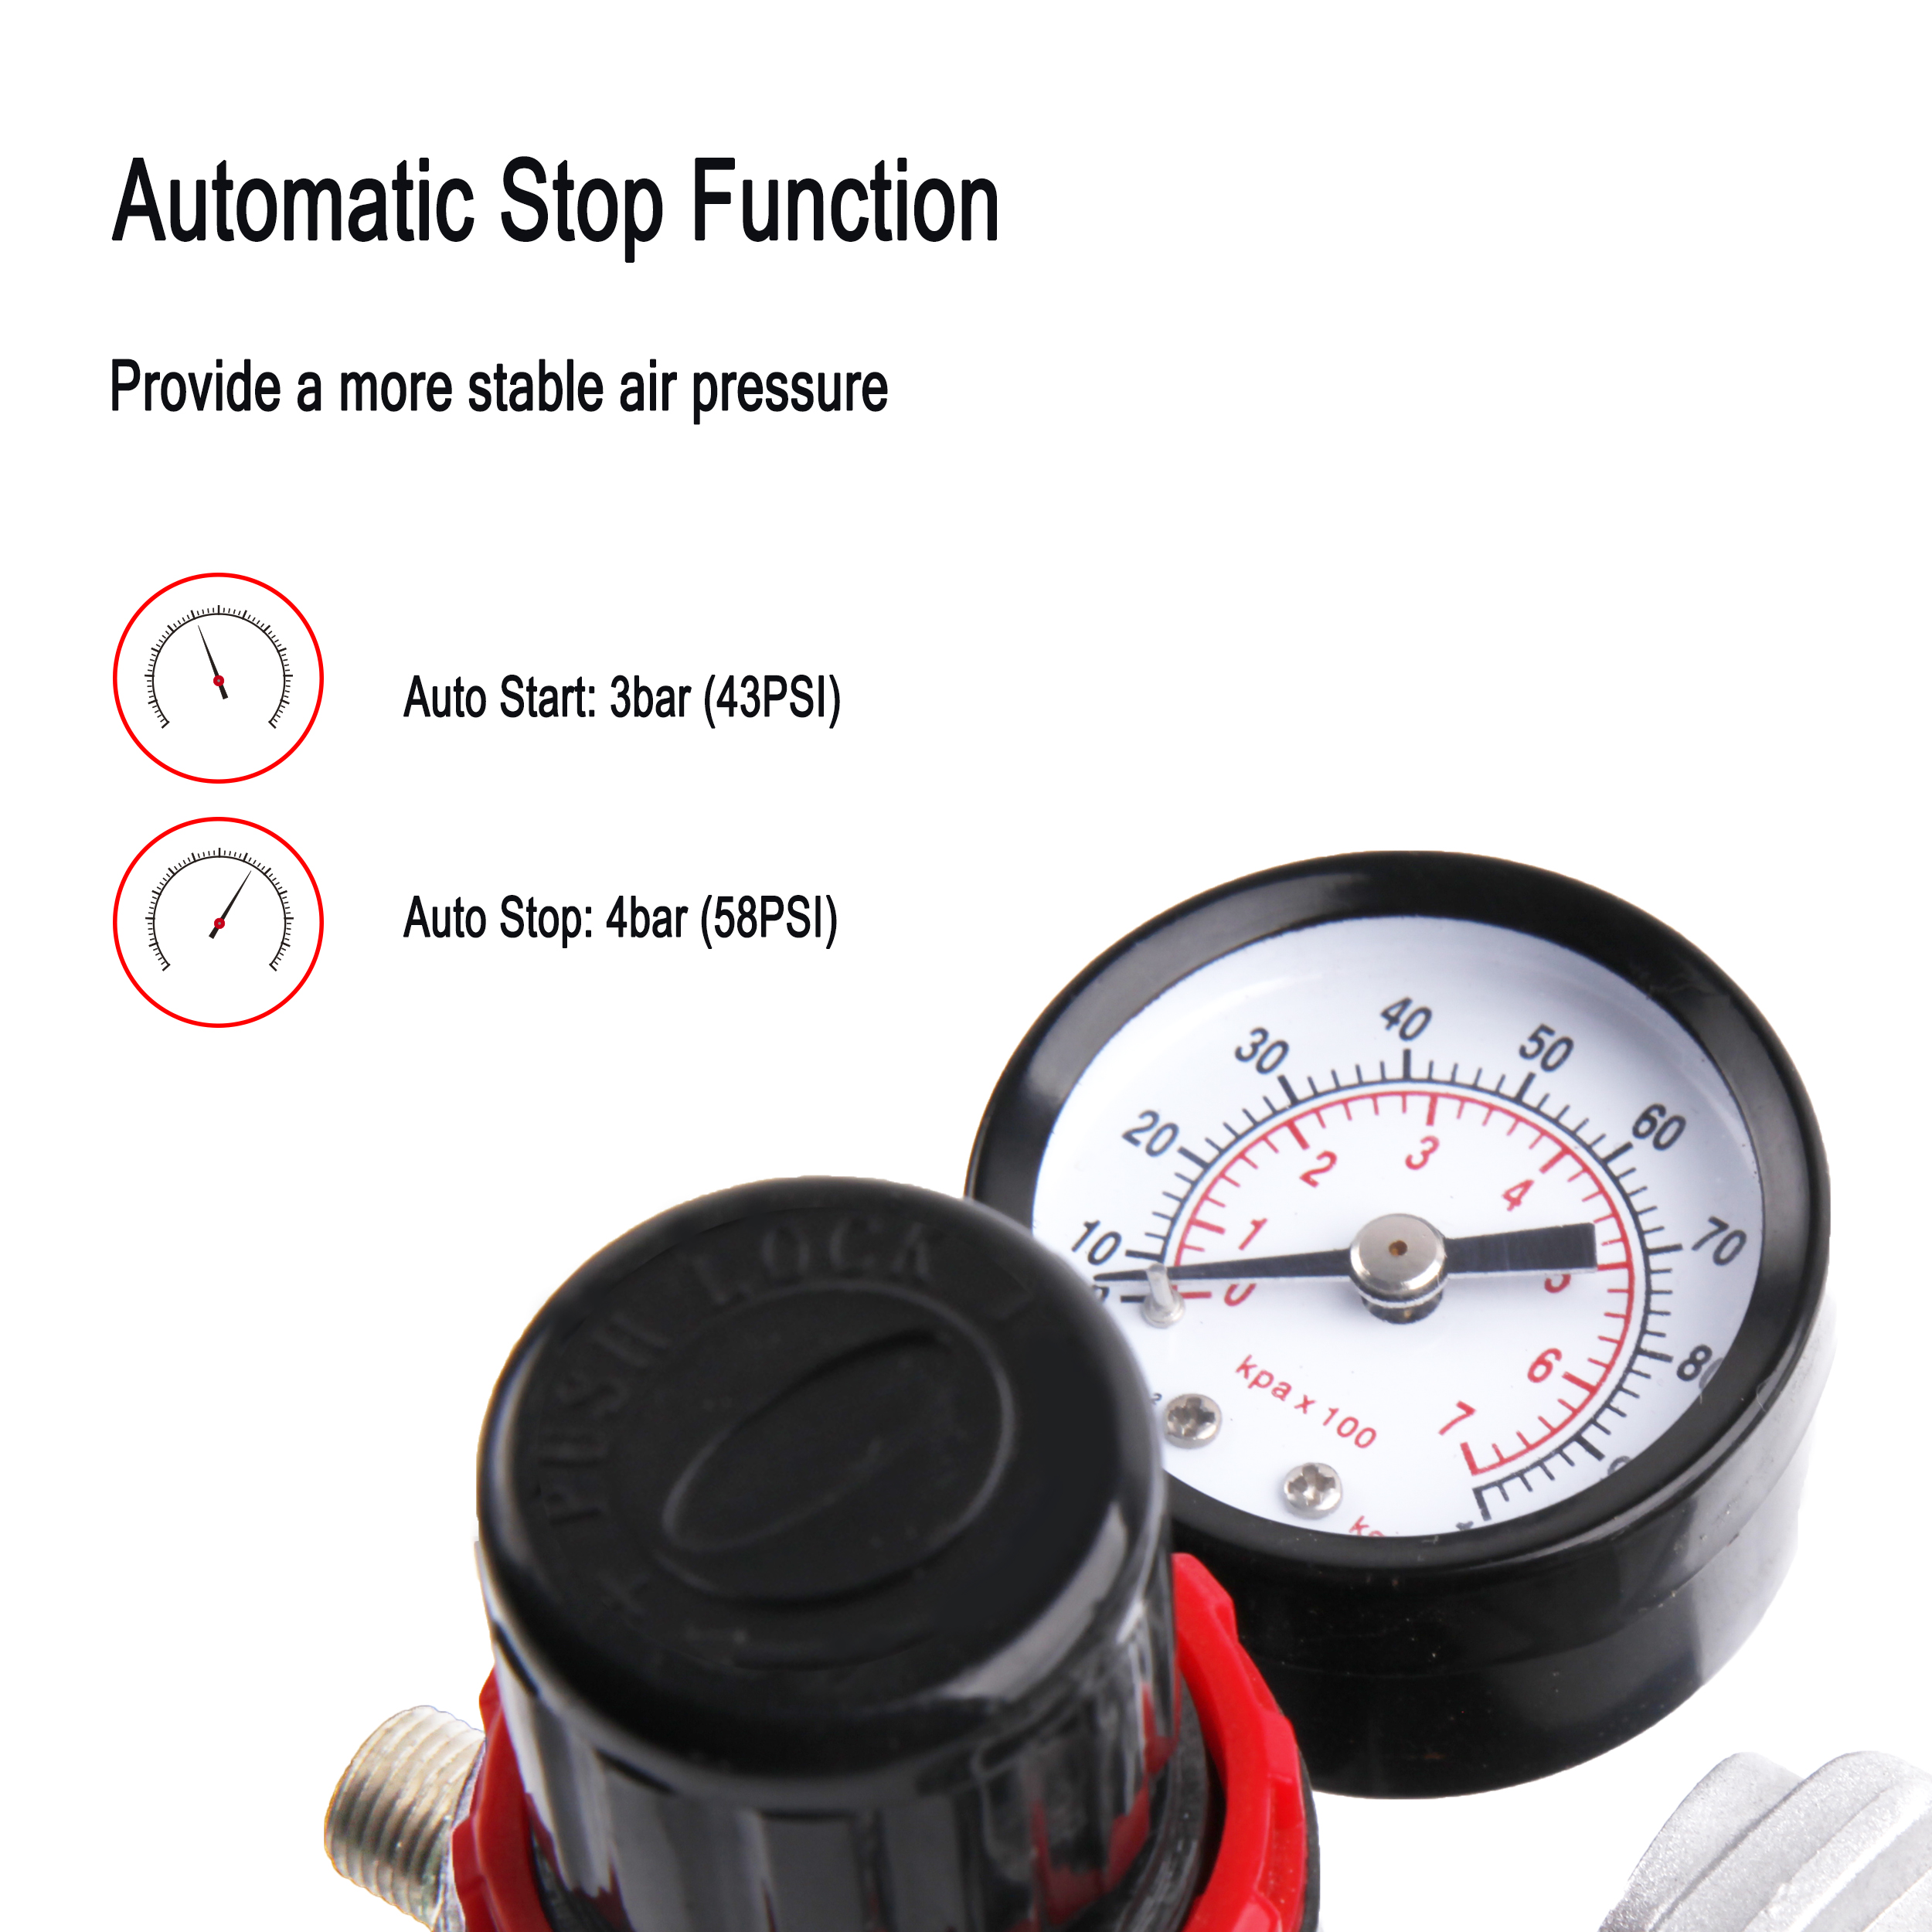 Airbrush Compressor AS18-2  Basic Mini Compressor  4 Bar/Auto Stop for Hobby Paint Body Tattoo Cake Decoration